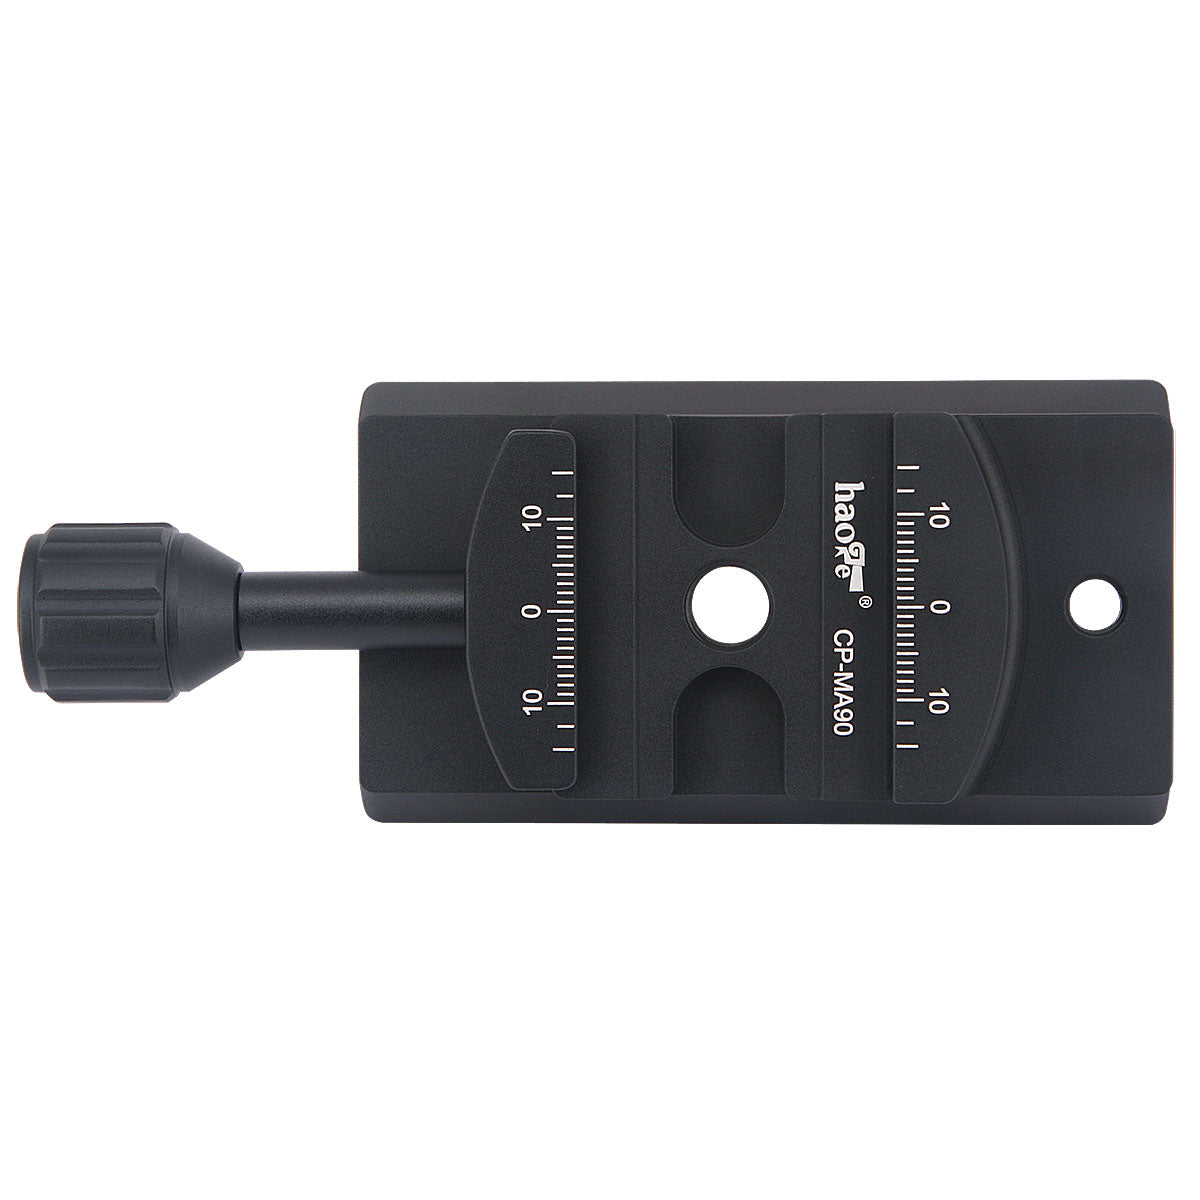 Haoge CP-MA90 Quick Release QR Clamp Adapter Convertor for Select Manfrotto Sachtler Benro Sirui Tripod Fluid Video Head to Arca-Swiss Compatible